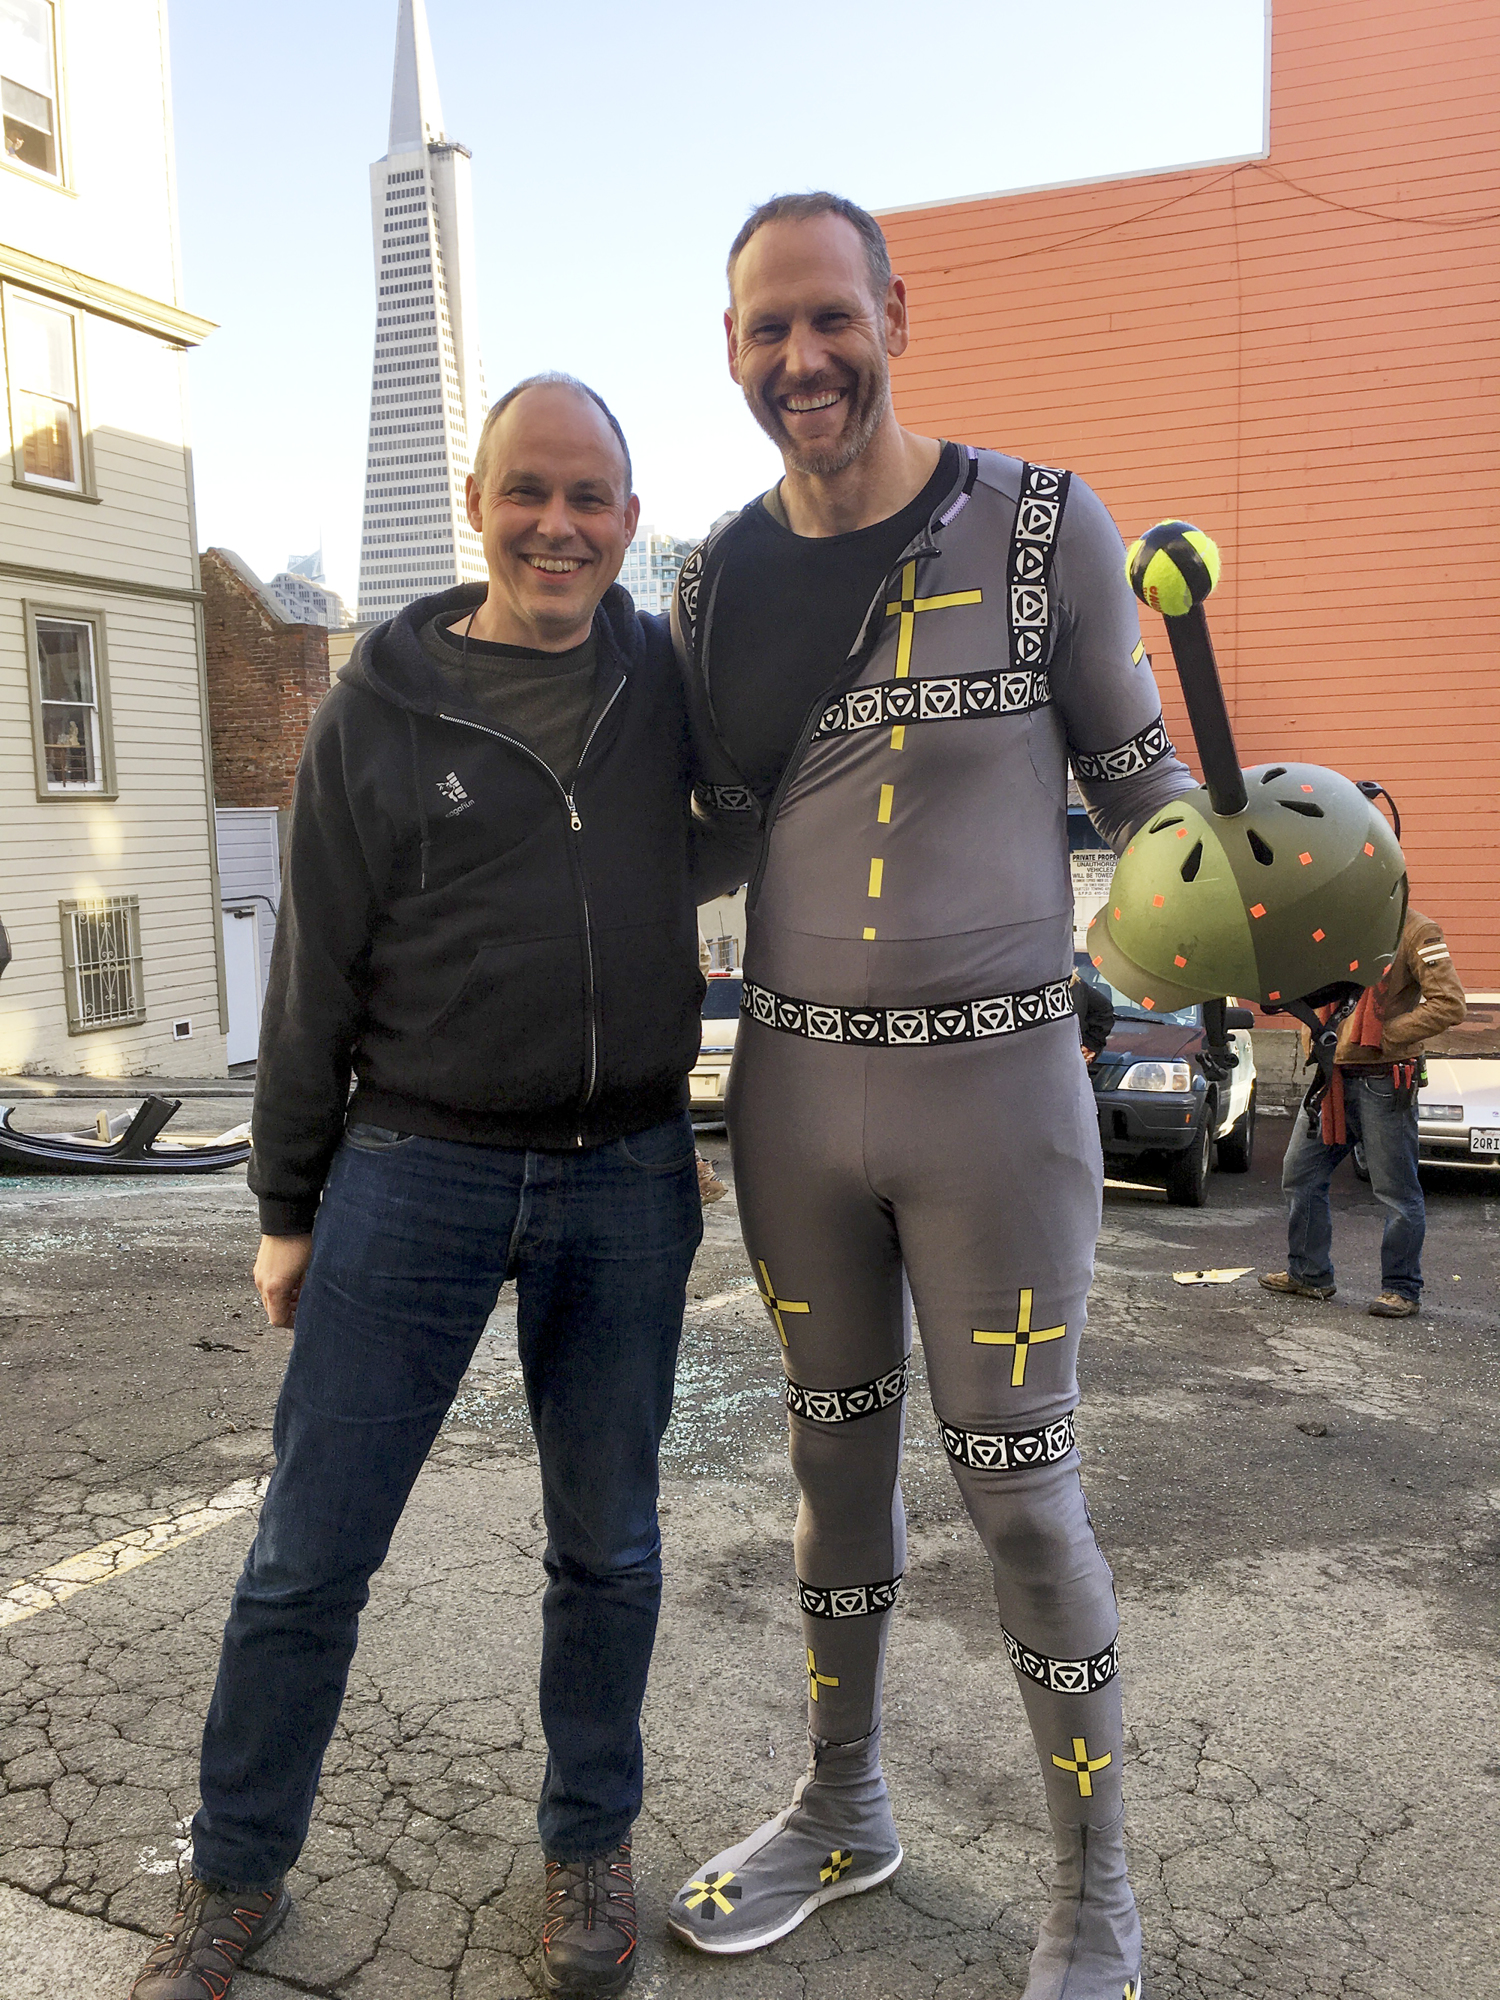 Keil Zepernick, right, performed motion-capture work in the “Venom” movie. (Courtesy photo)